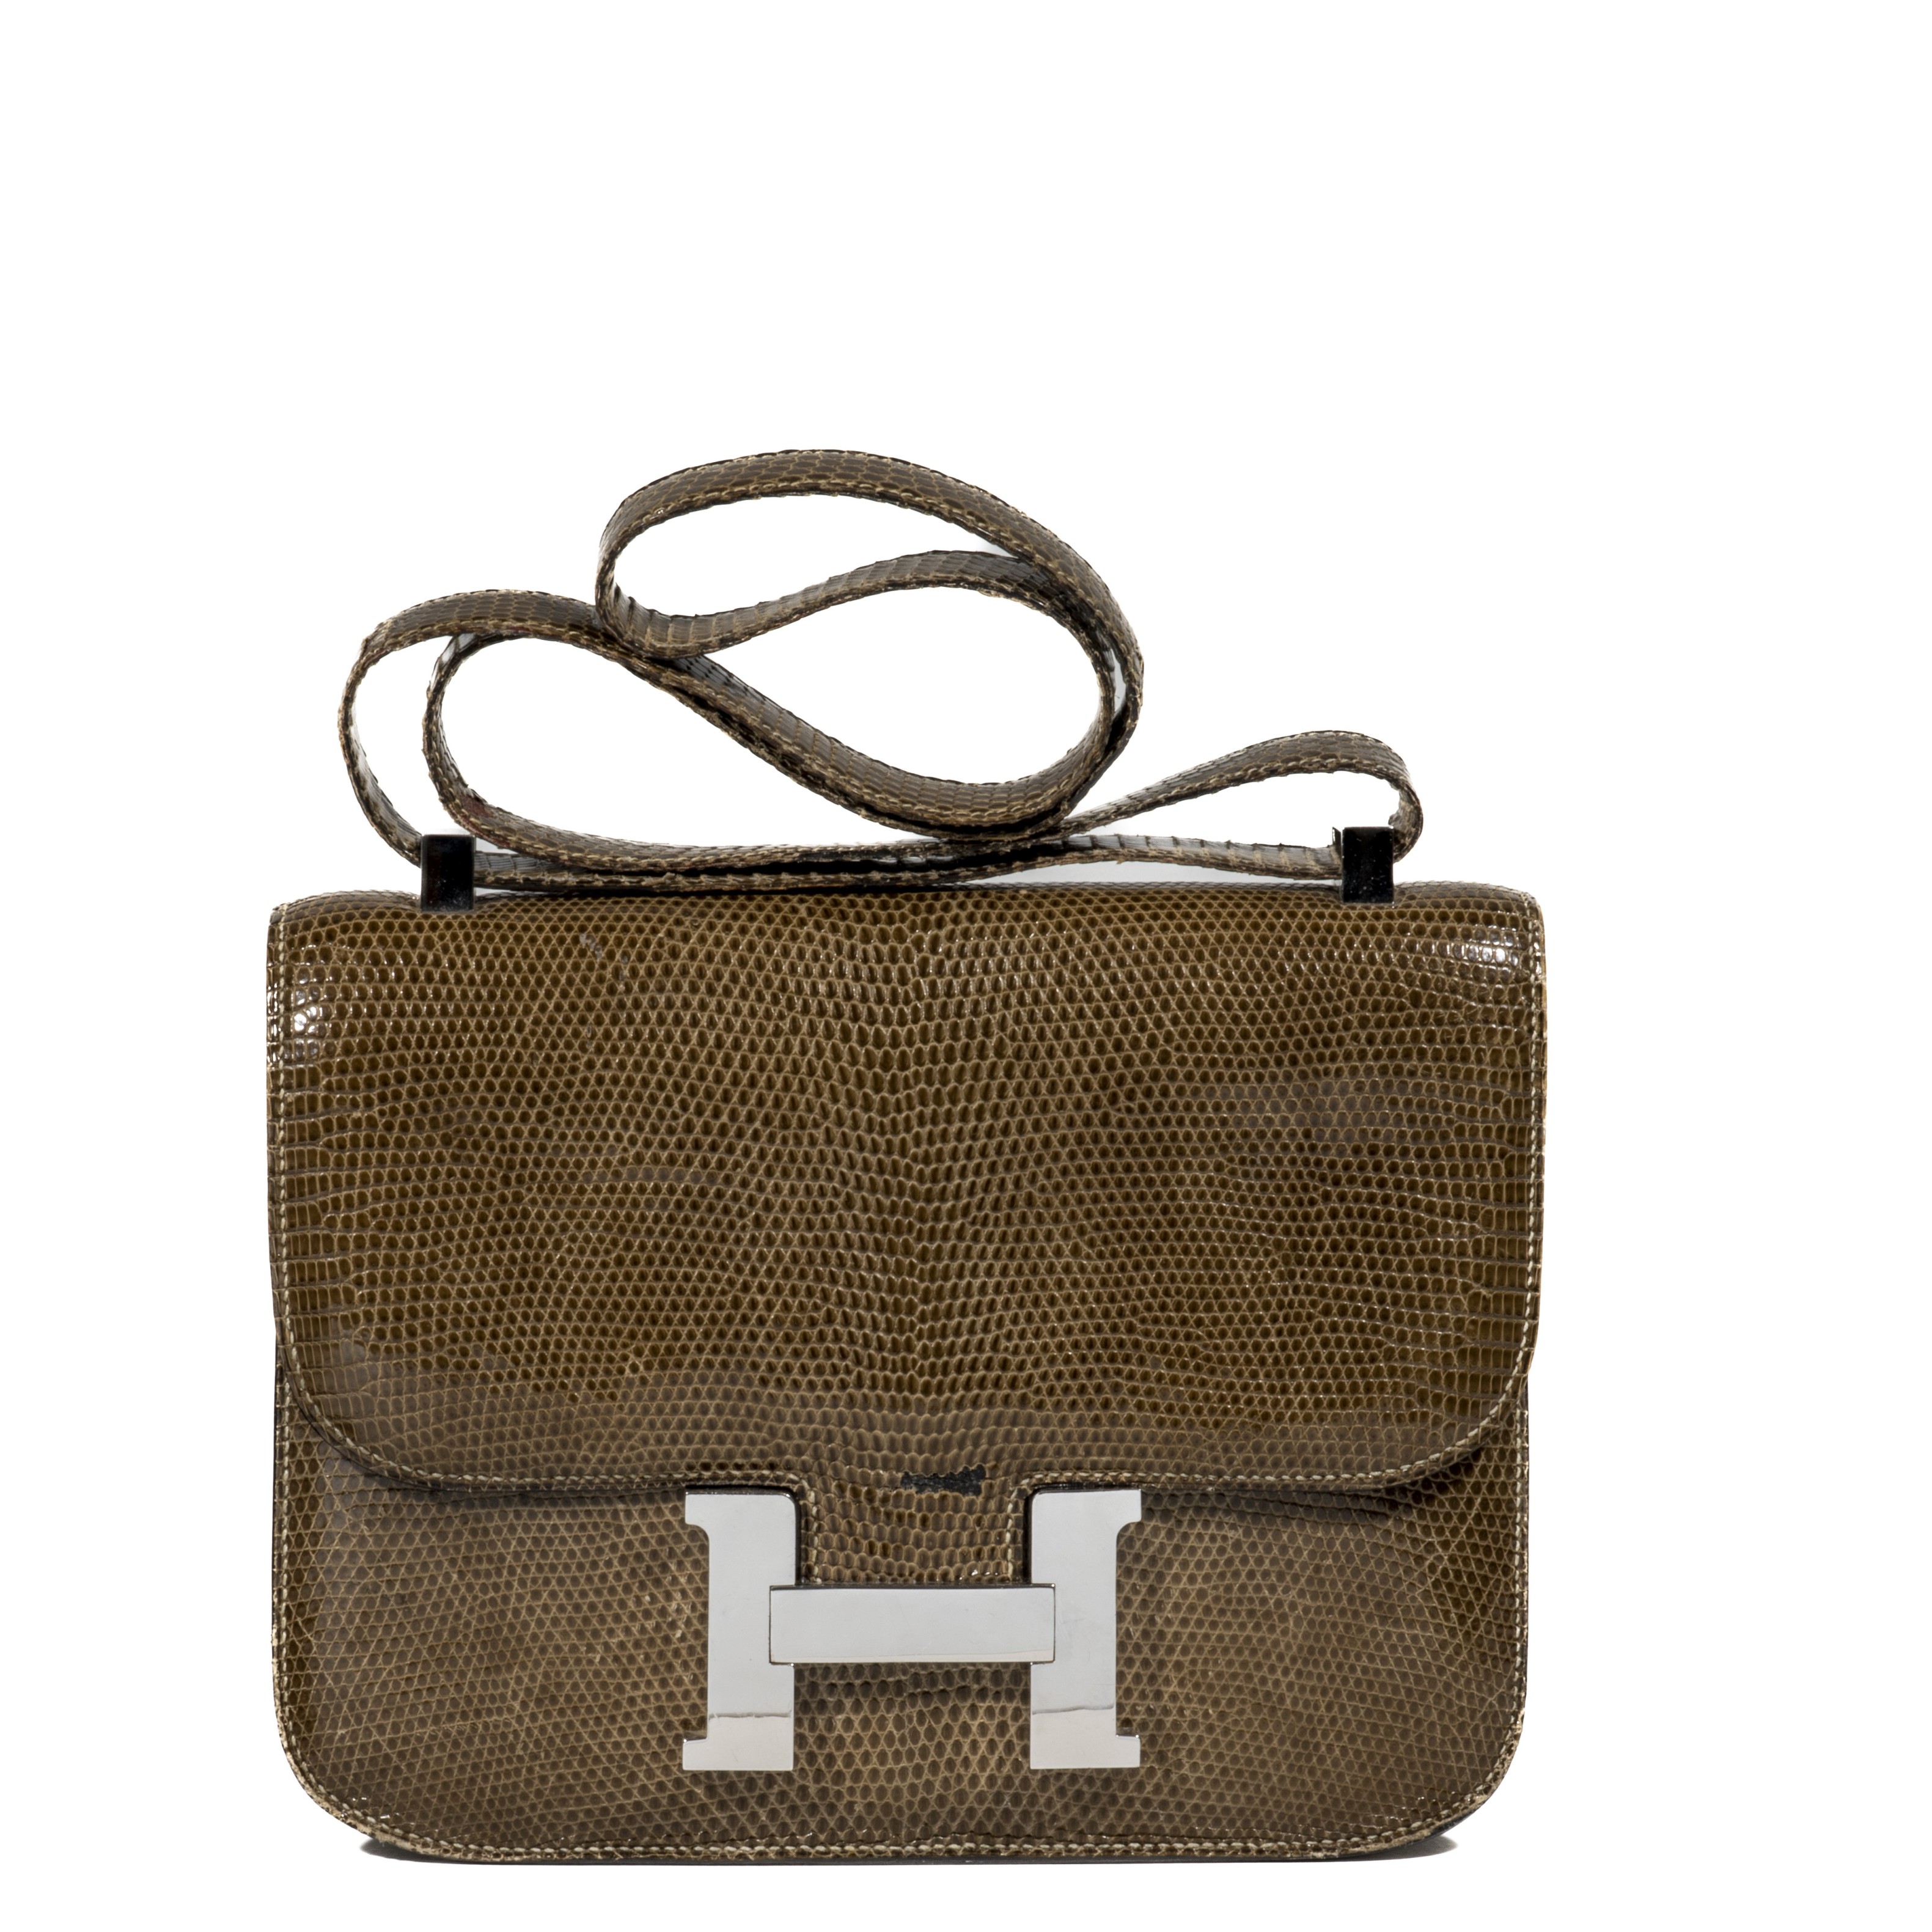 HERMES Paris, made in France. Sac 'Constance' 22.